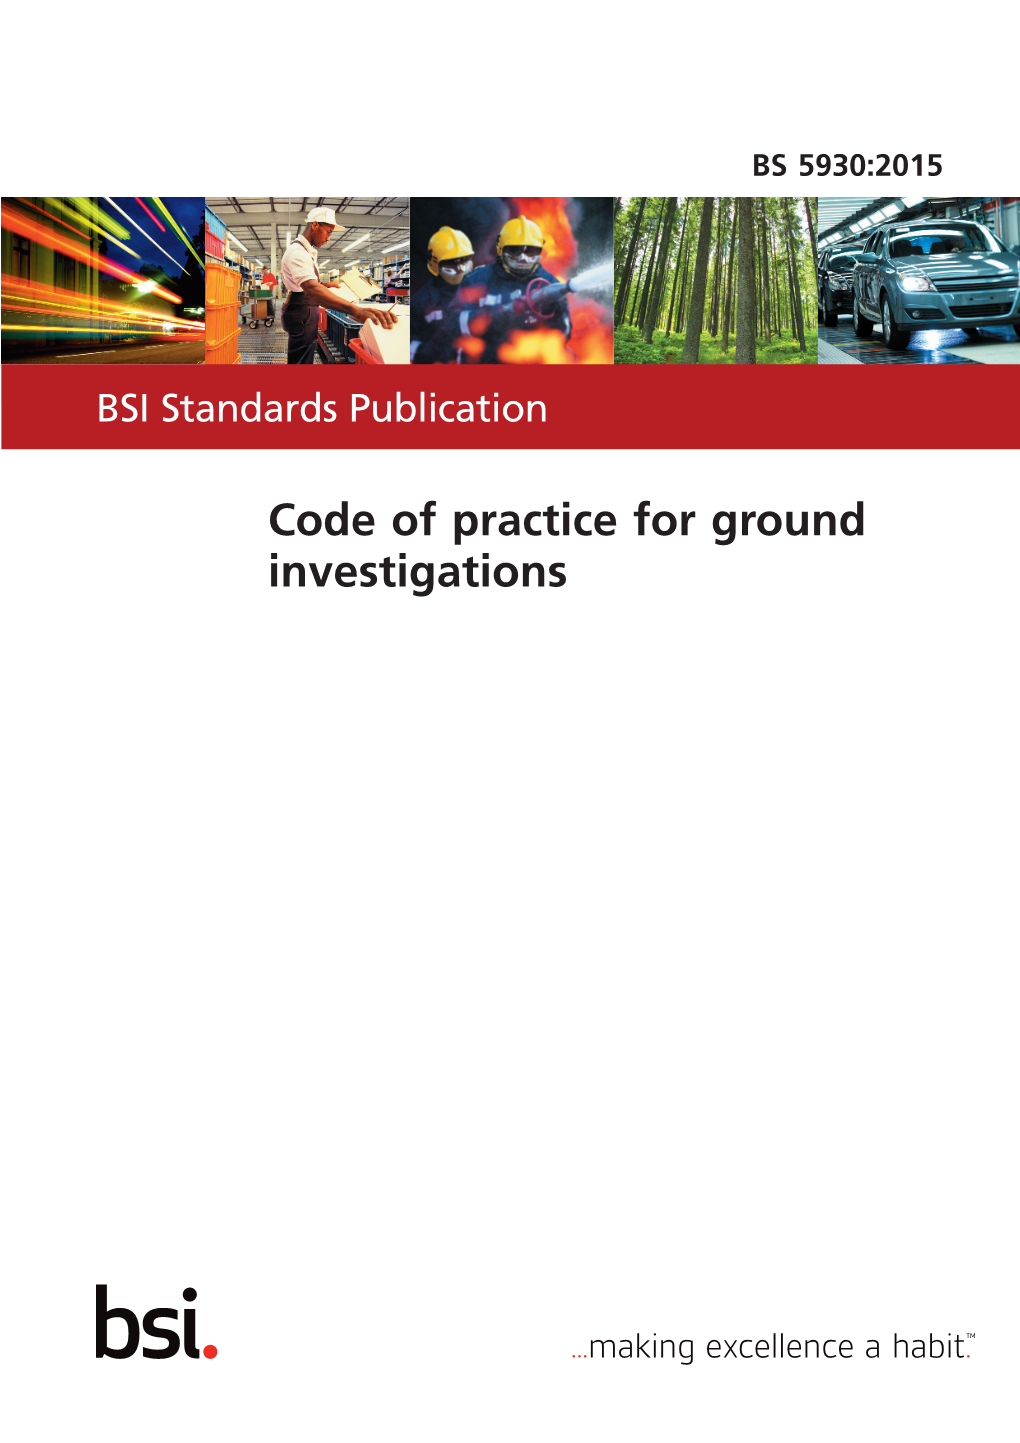 Code of Practice for Ground Investigations BS 5930:2015 BRITISH STANDARD